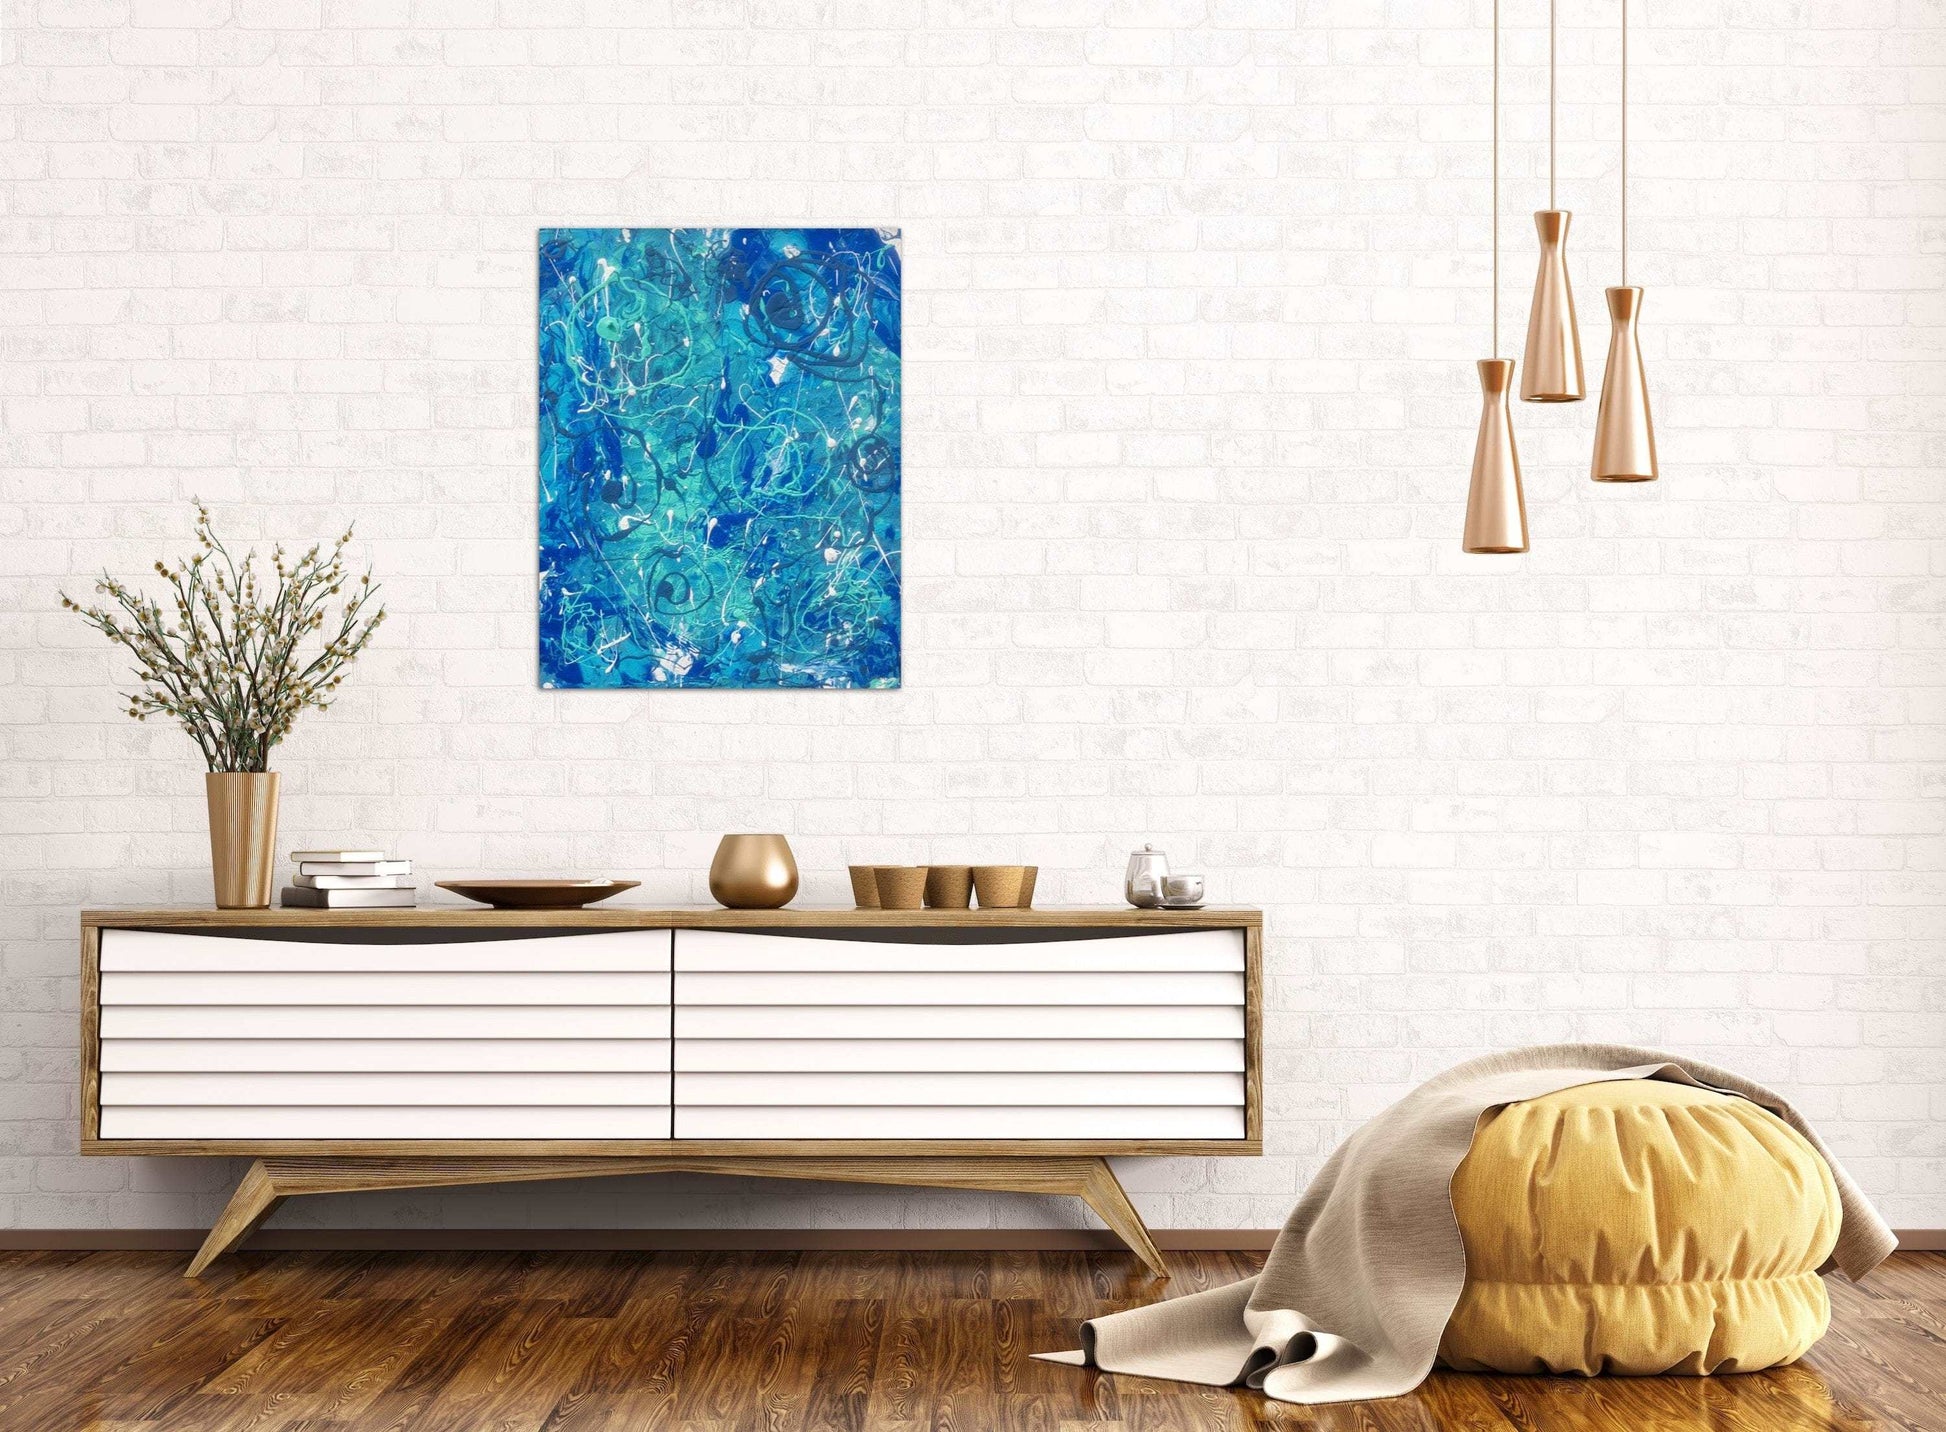 Water Original - Medium Size, Swirly, Textured, Blue, Abstract Art Design Painting, Modern Wall Art, by Art With Evie